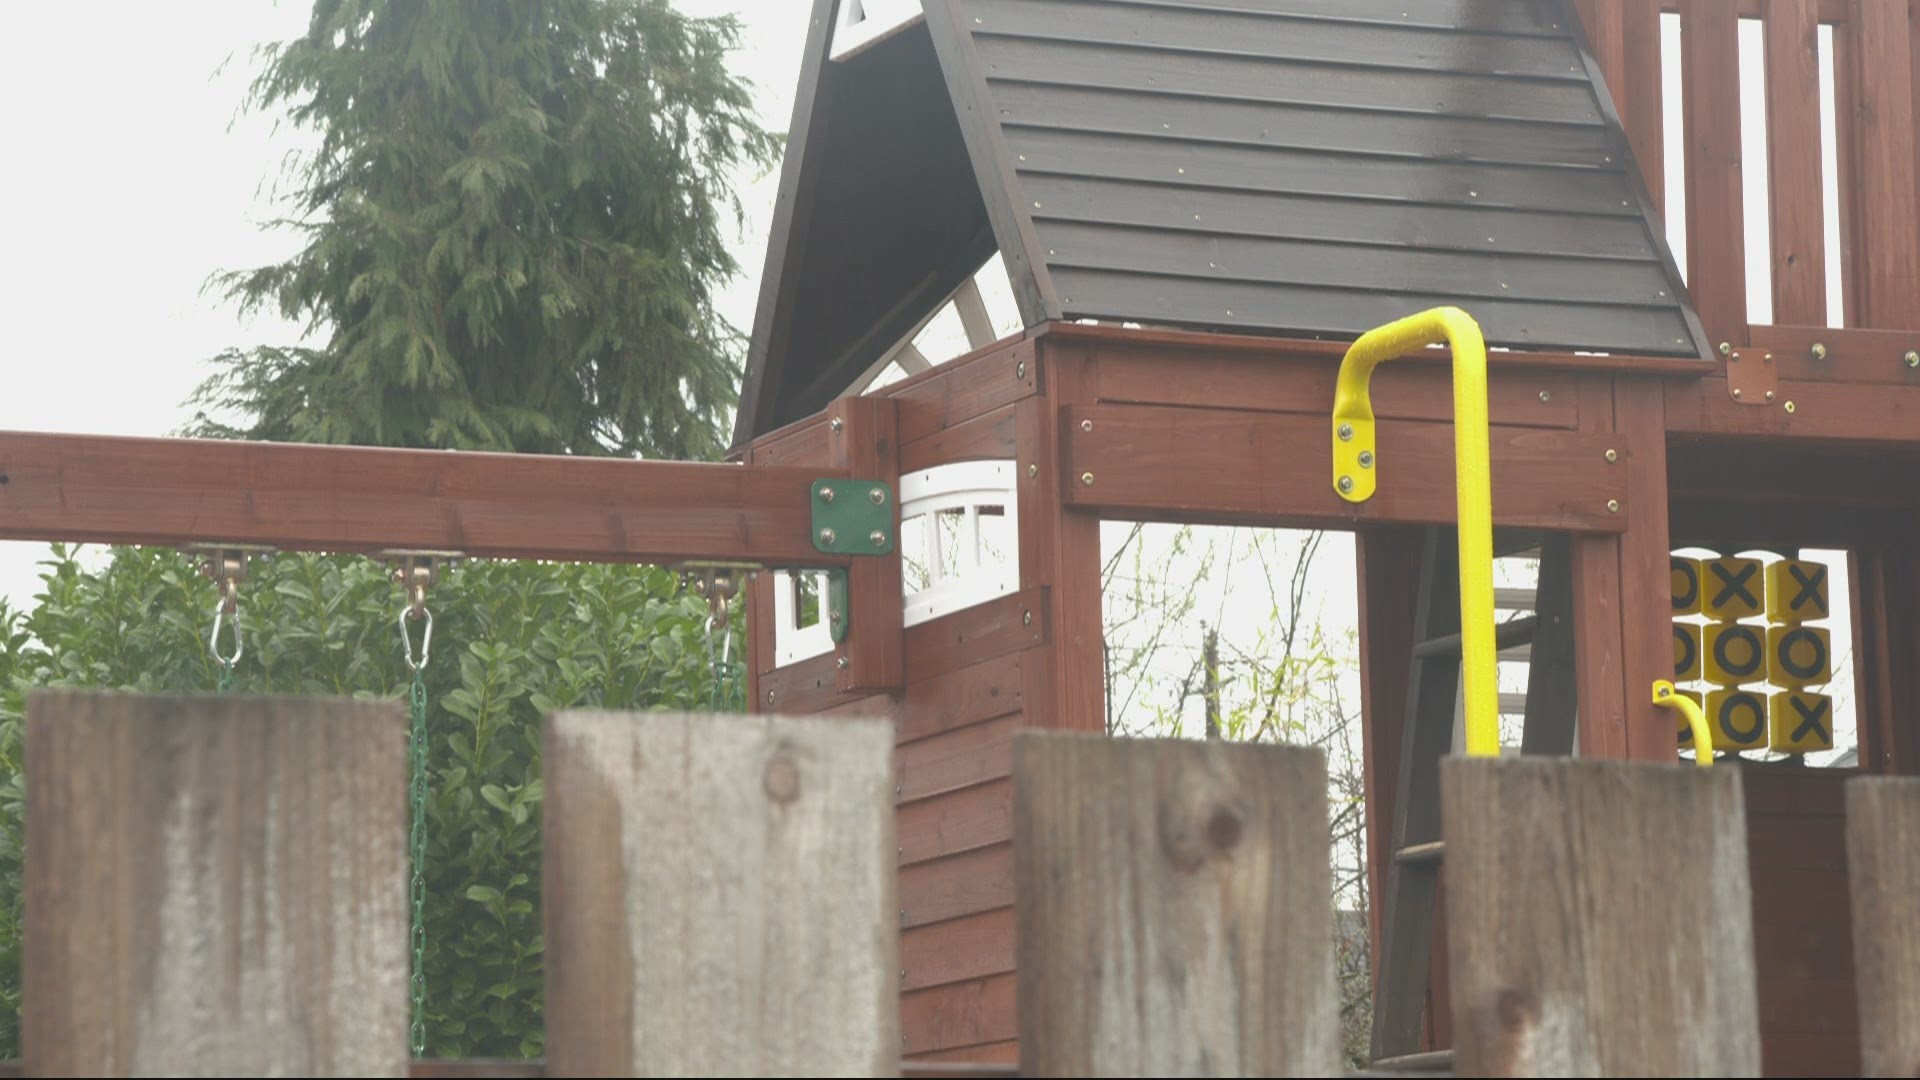 In the past two months, Portland police reported 170 shooting calls, compared to 88 at this time last year. The latest happened outside a day care.